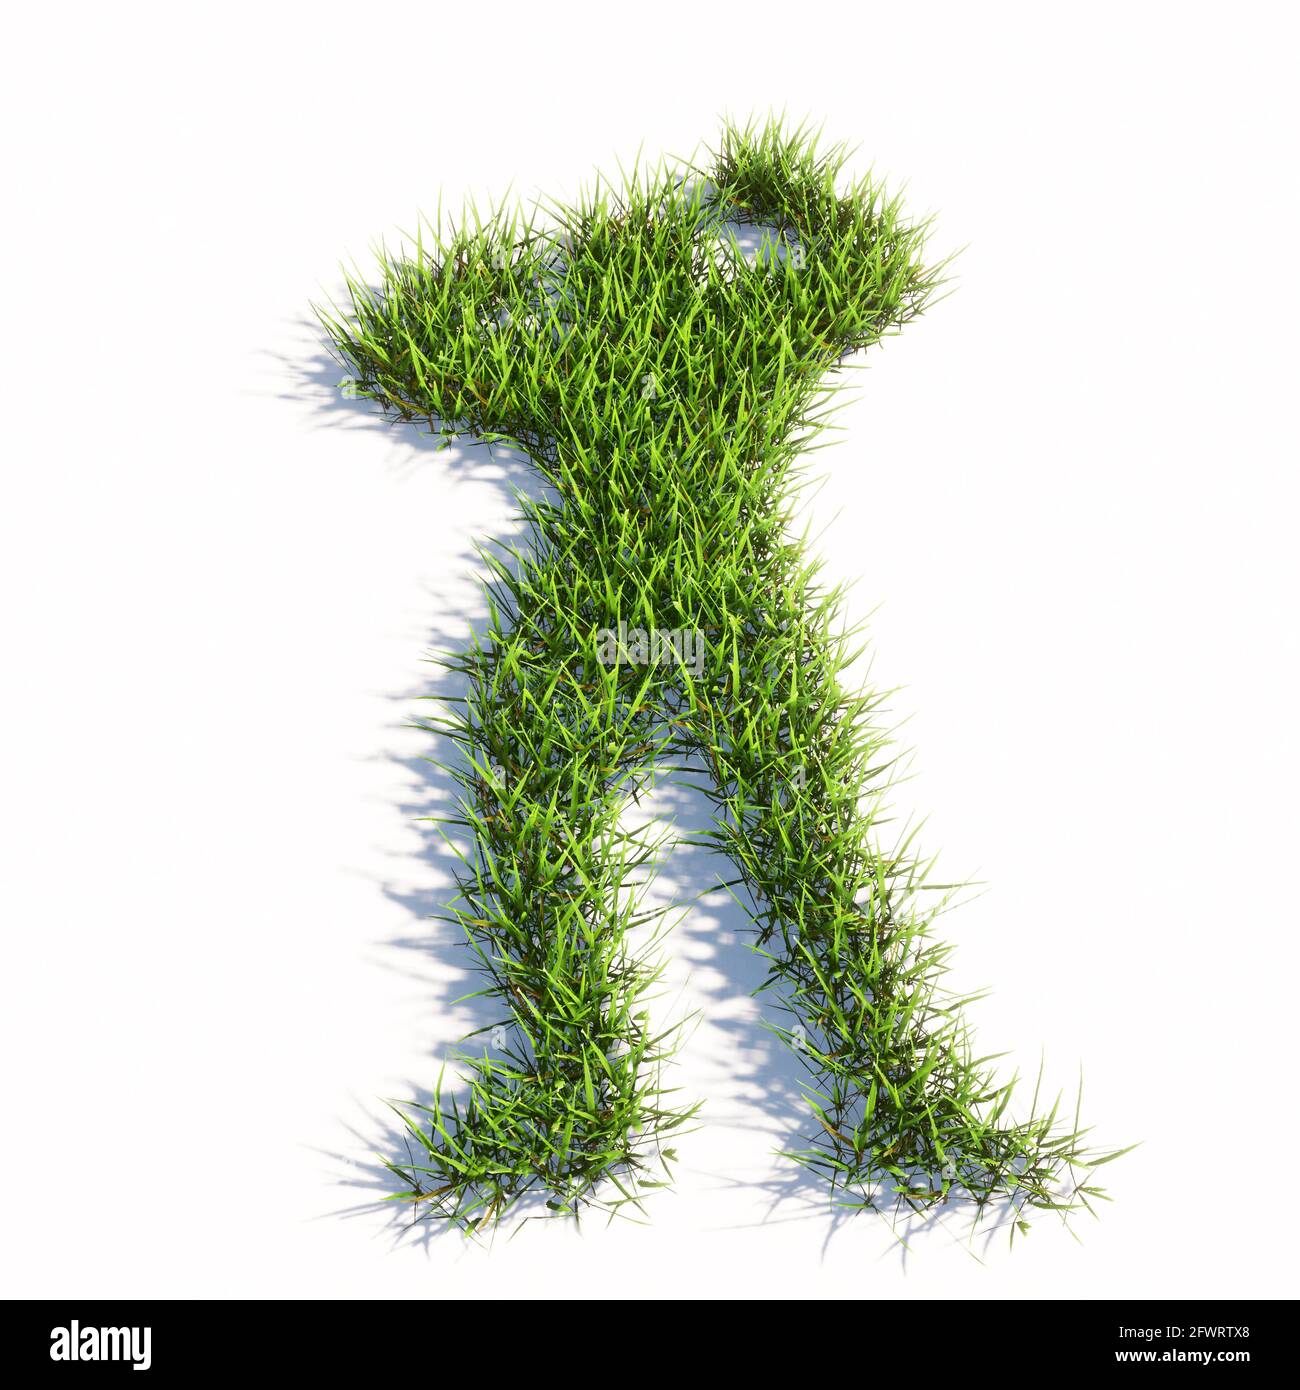 Concept or conceptual green summer lawn grass symbol isolated white background, sign of bodybuilder. 3d illustration metaphor for sport, competition Stock Photo